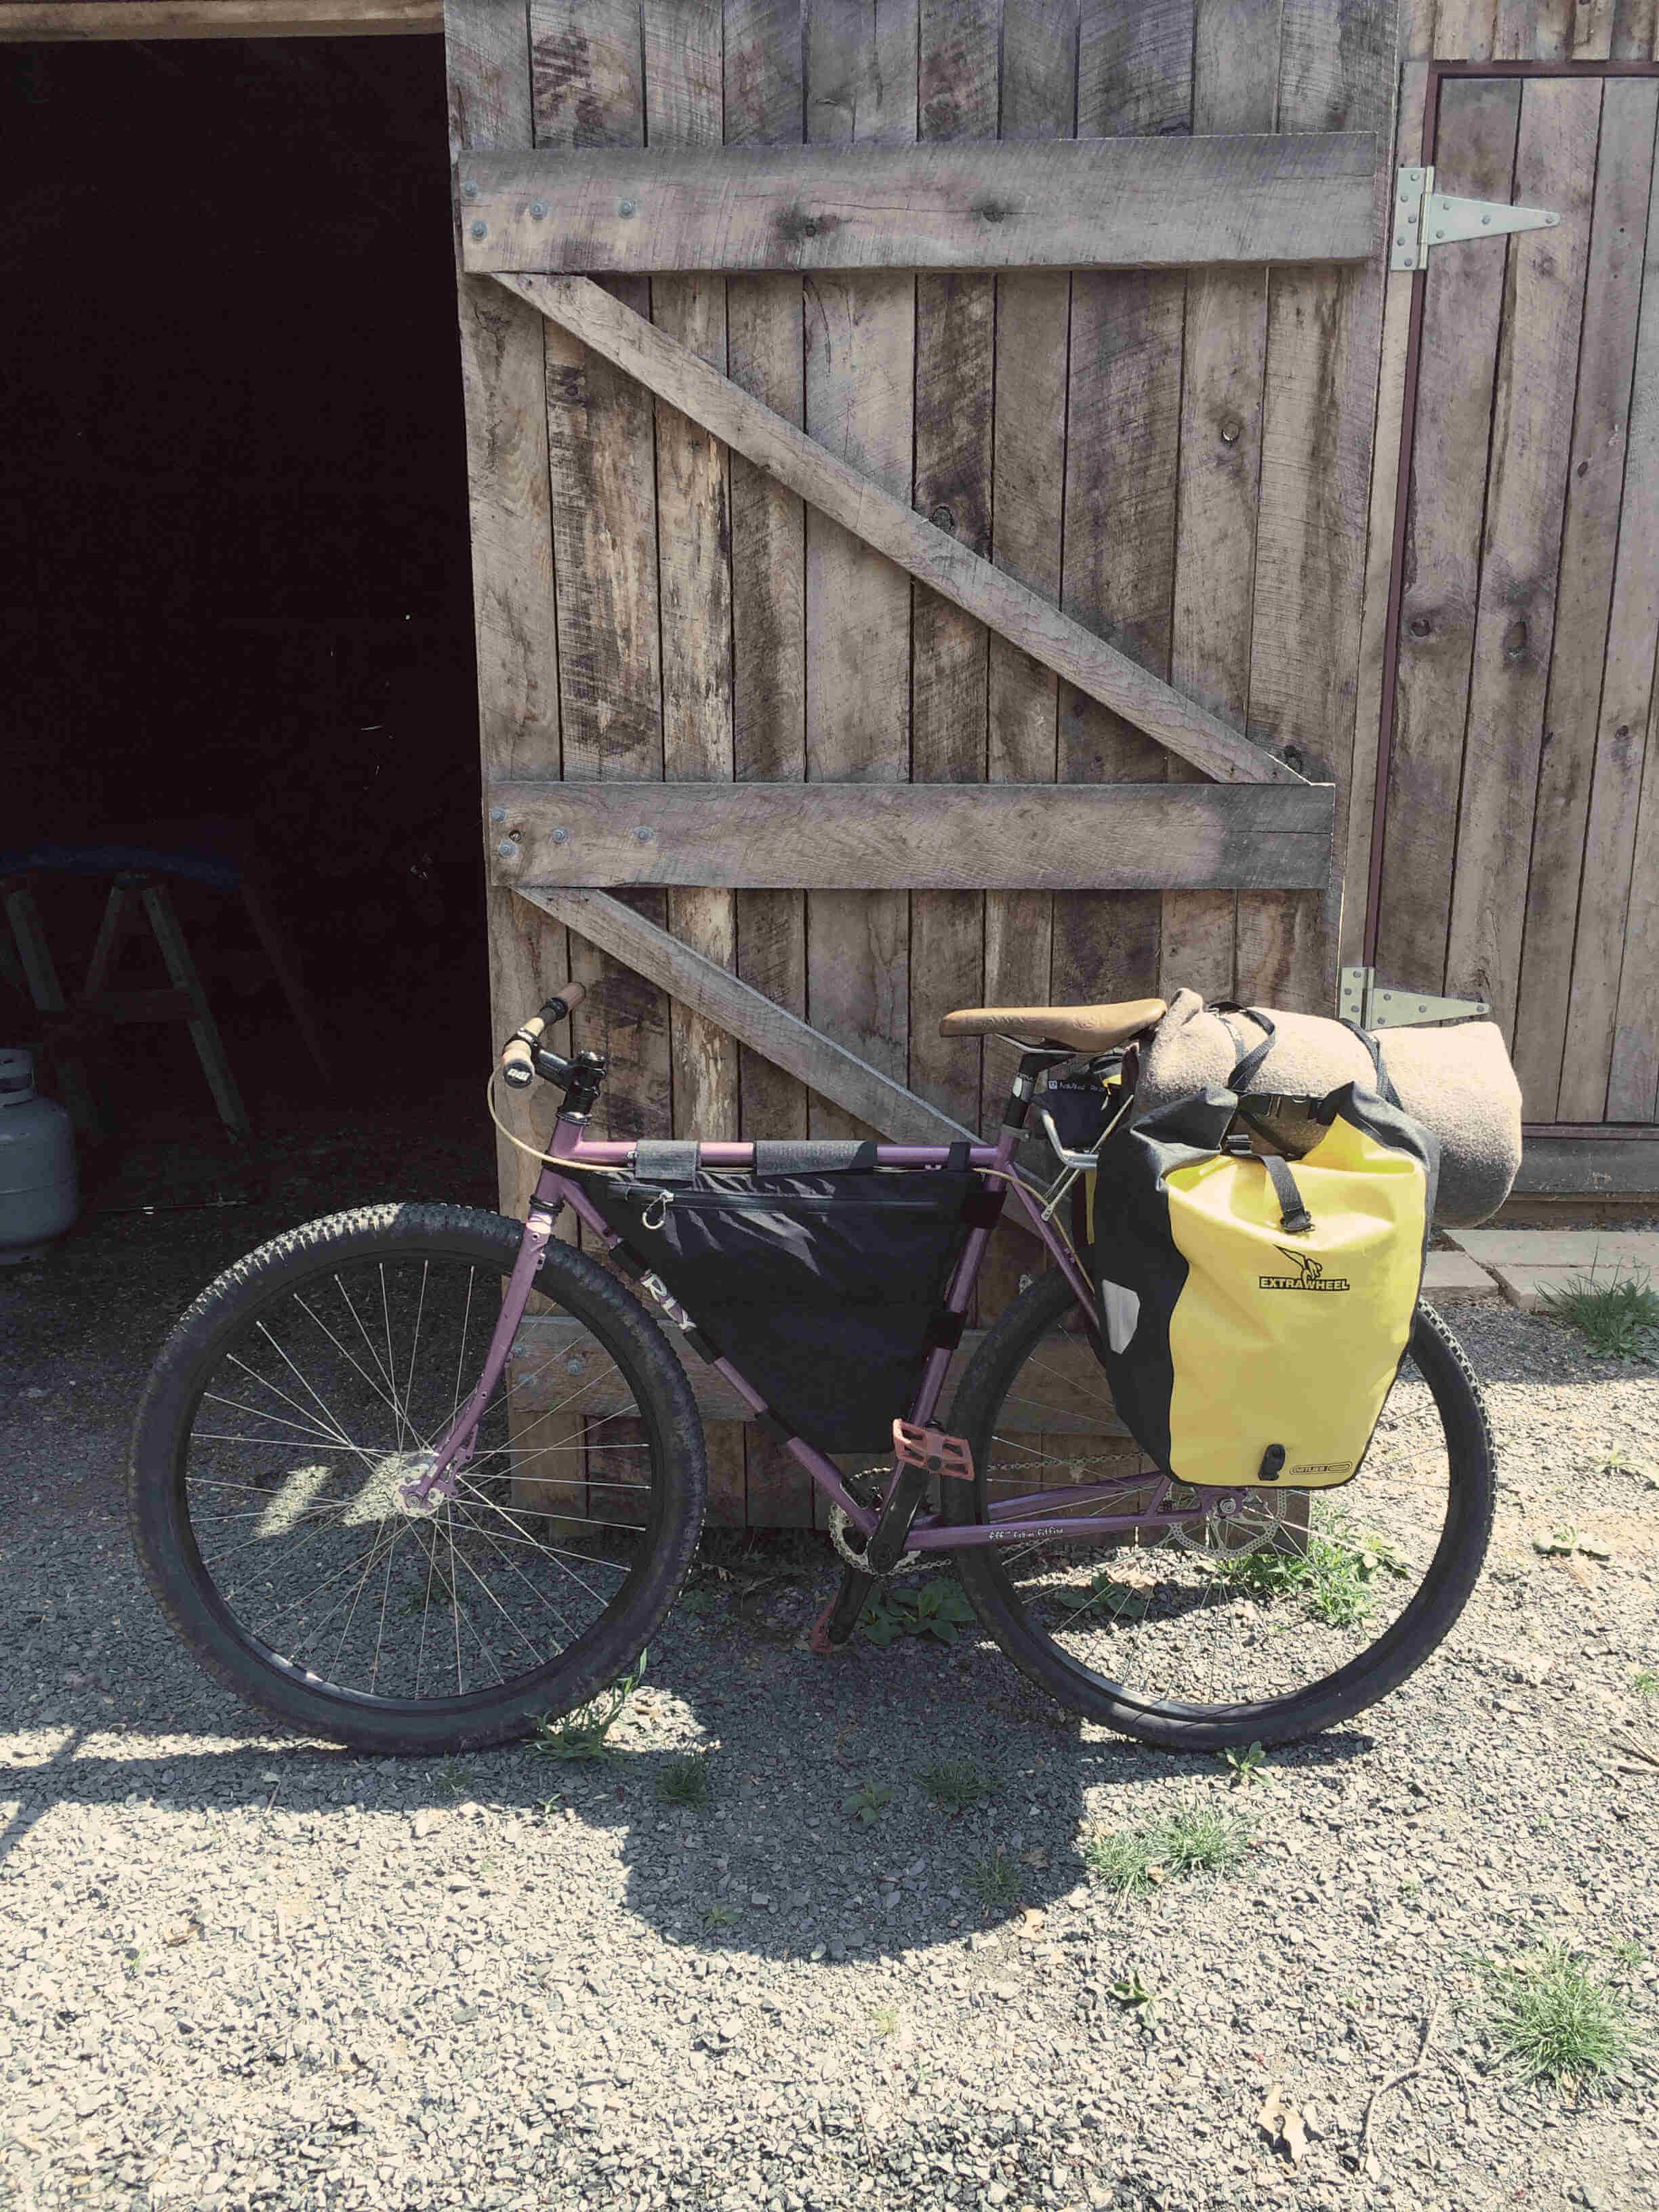 Right side view of a lavender color Surly bike with gear packs, parked against the door of a barn on gravel